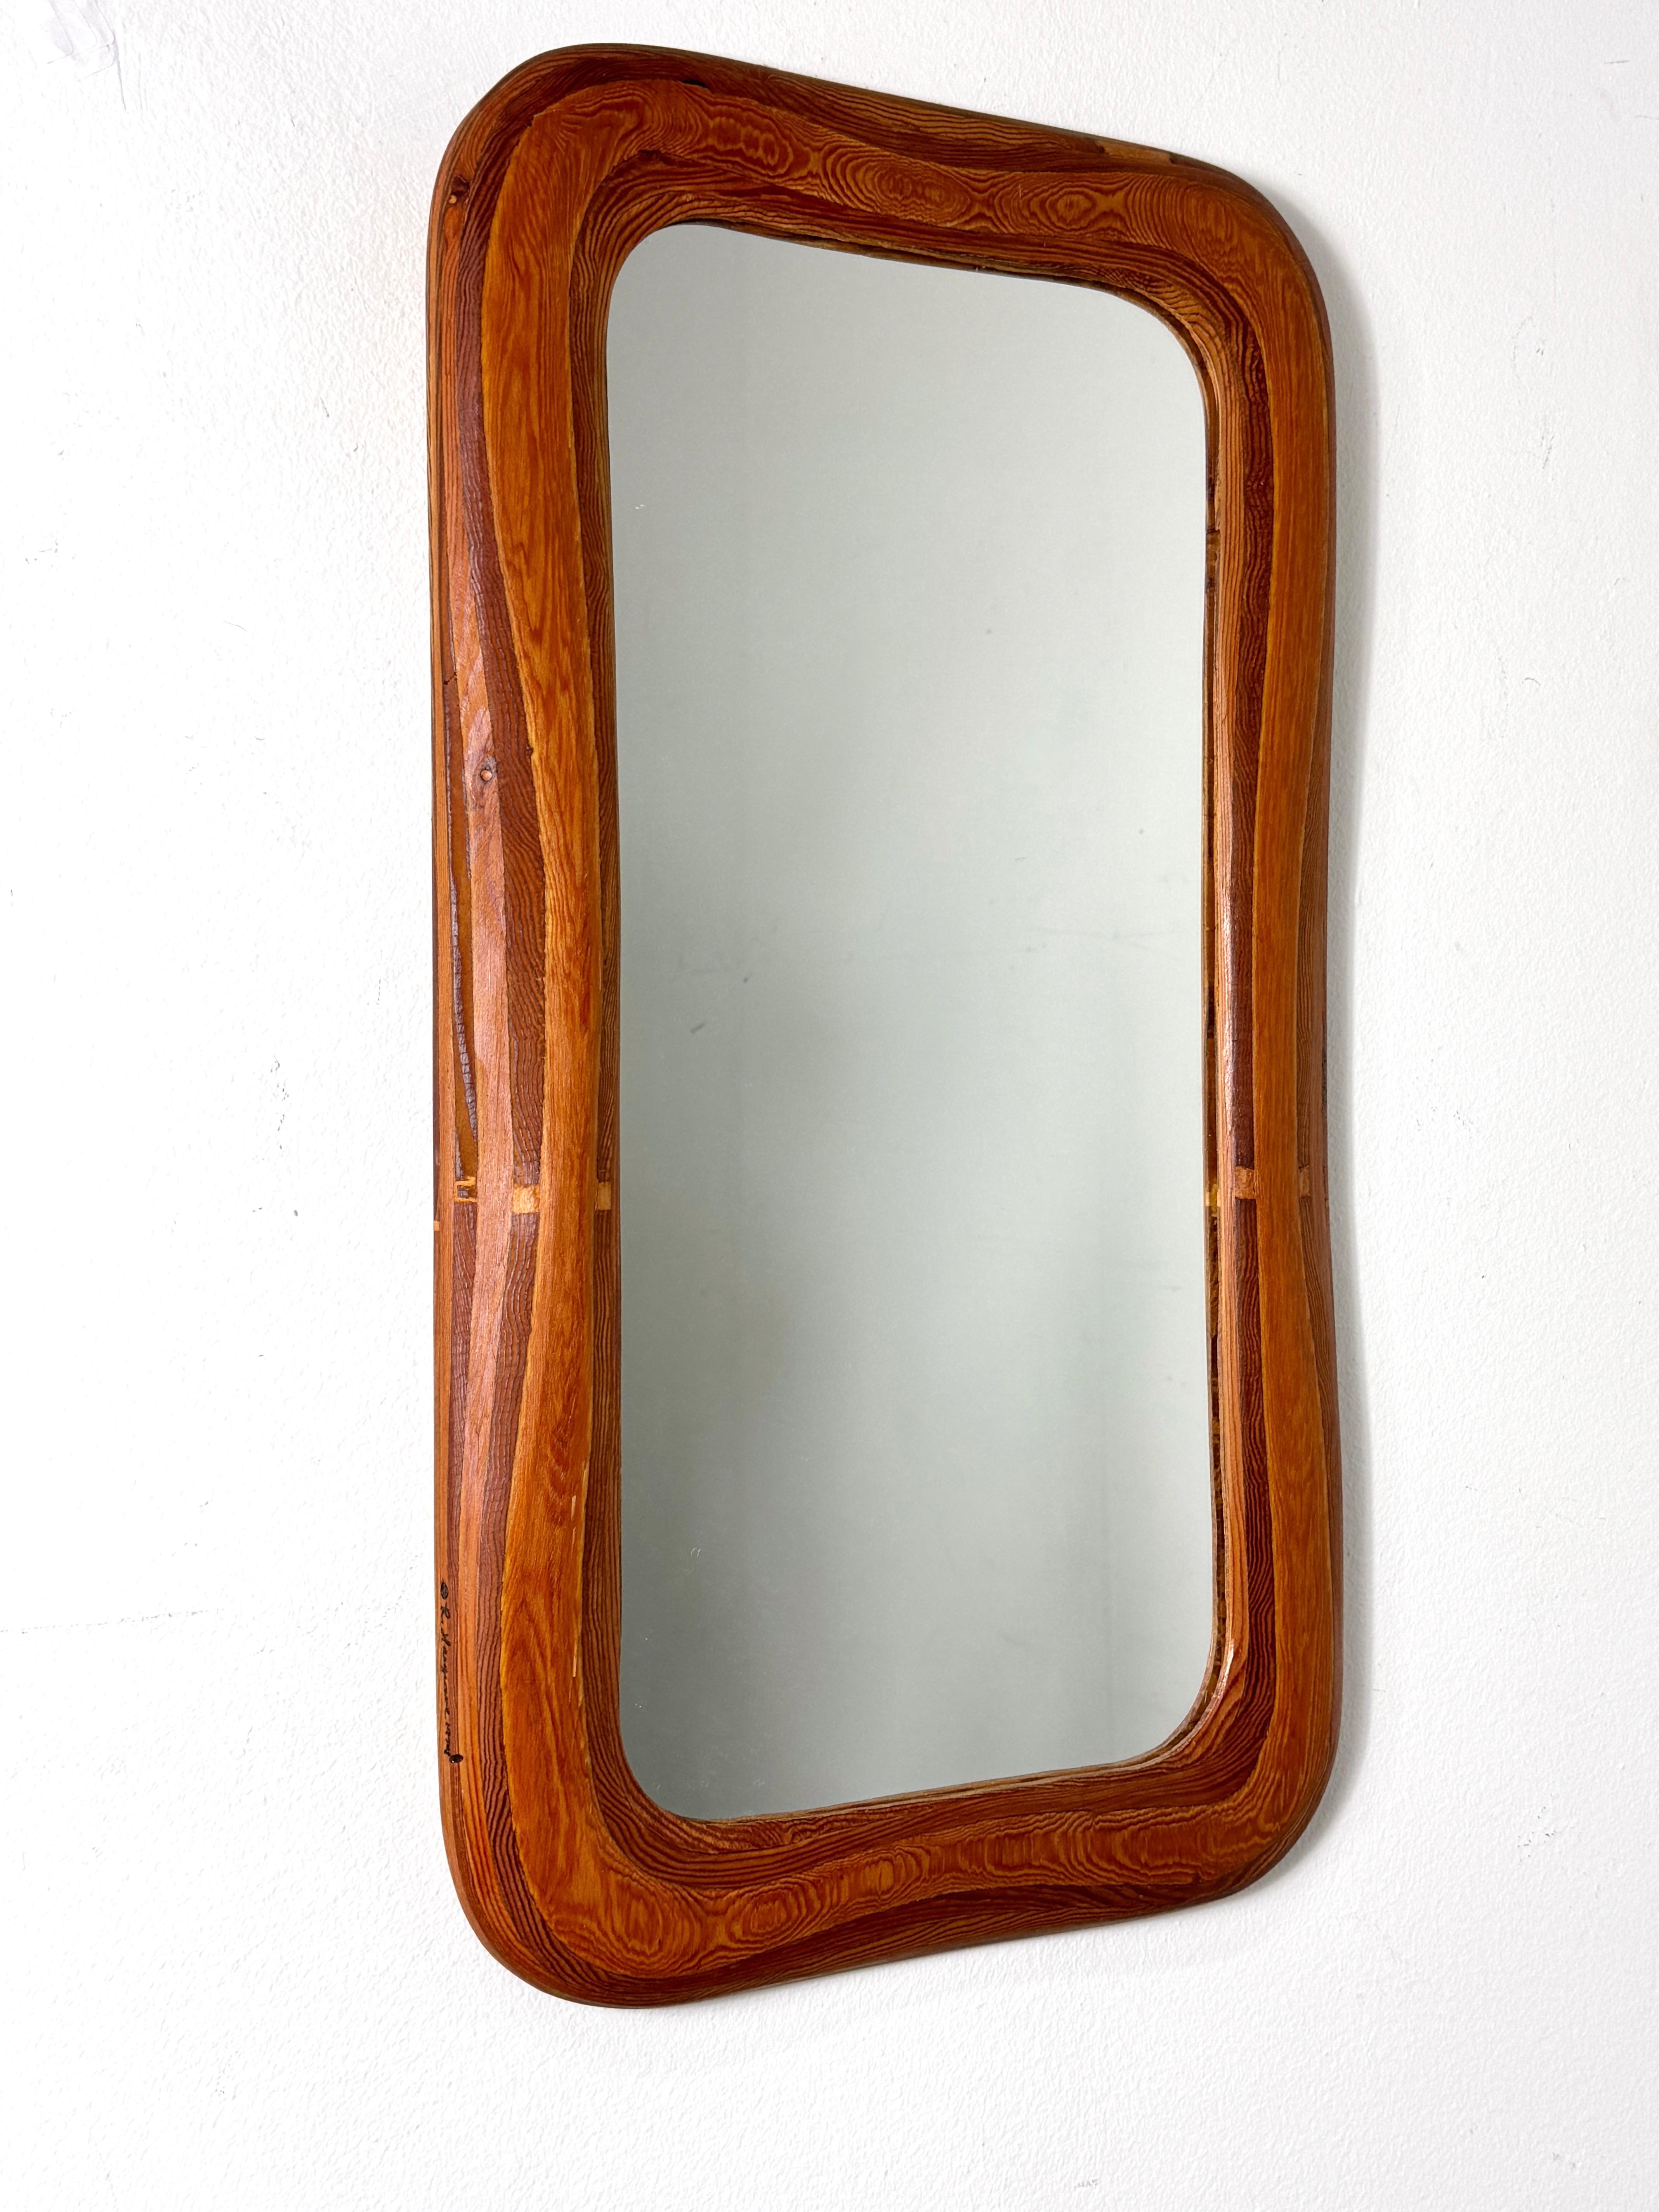 Organic Modern American Studio Craft Sculptural Wood Wall Shelf and Mirror by Robert Hargrave For Sale